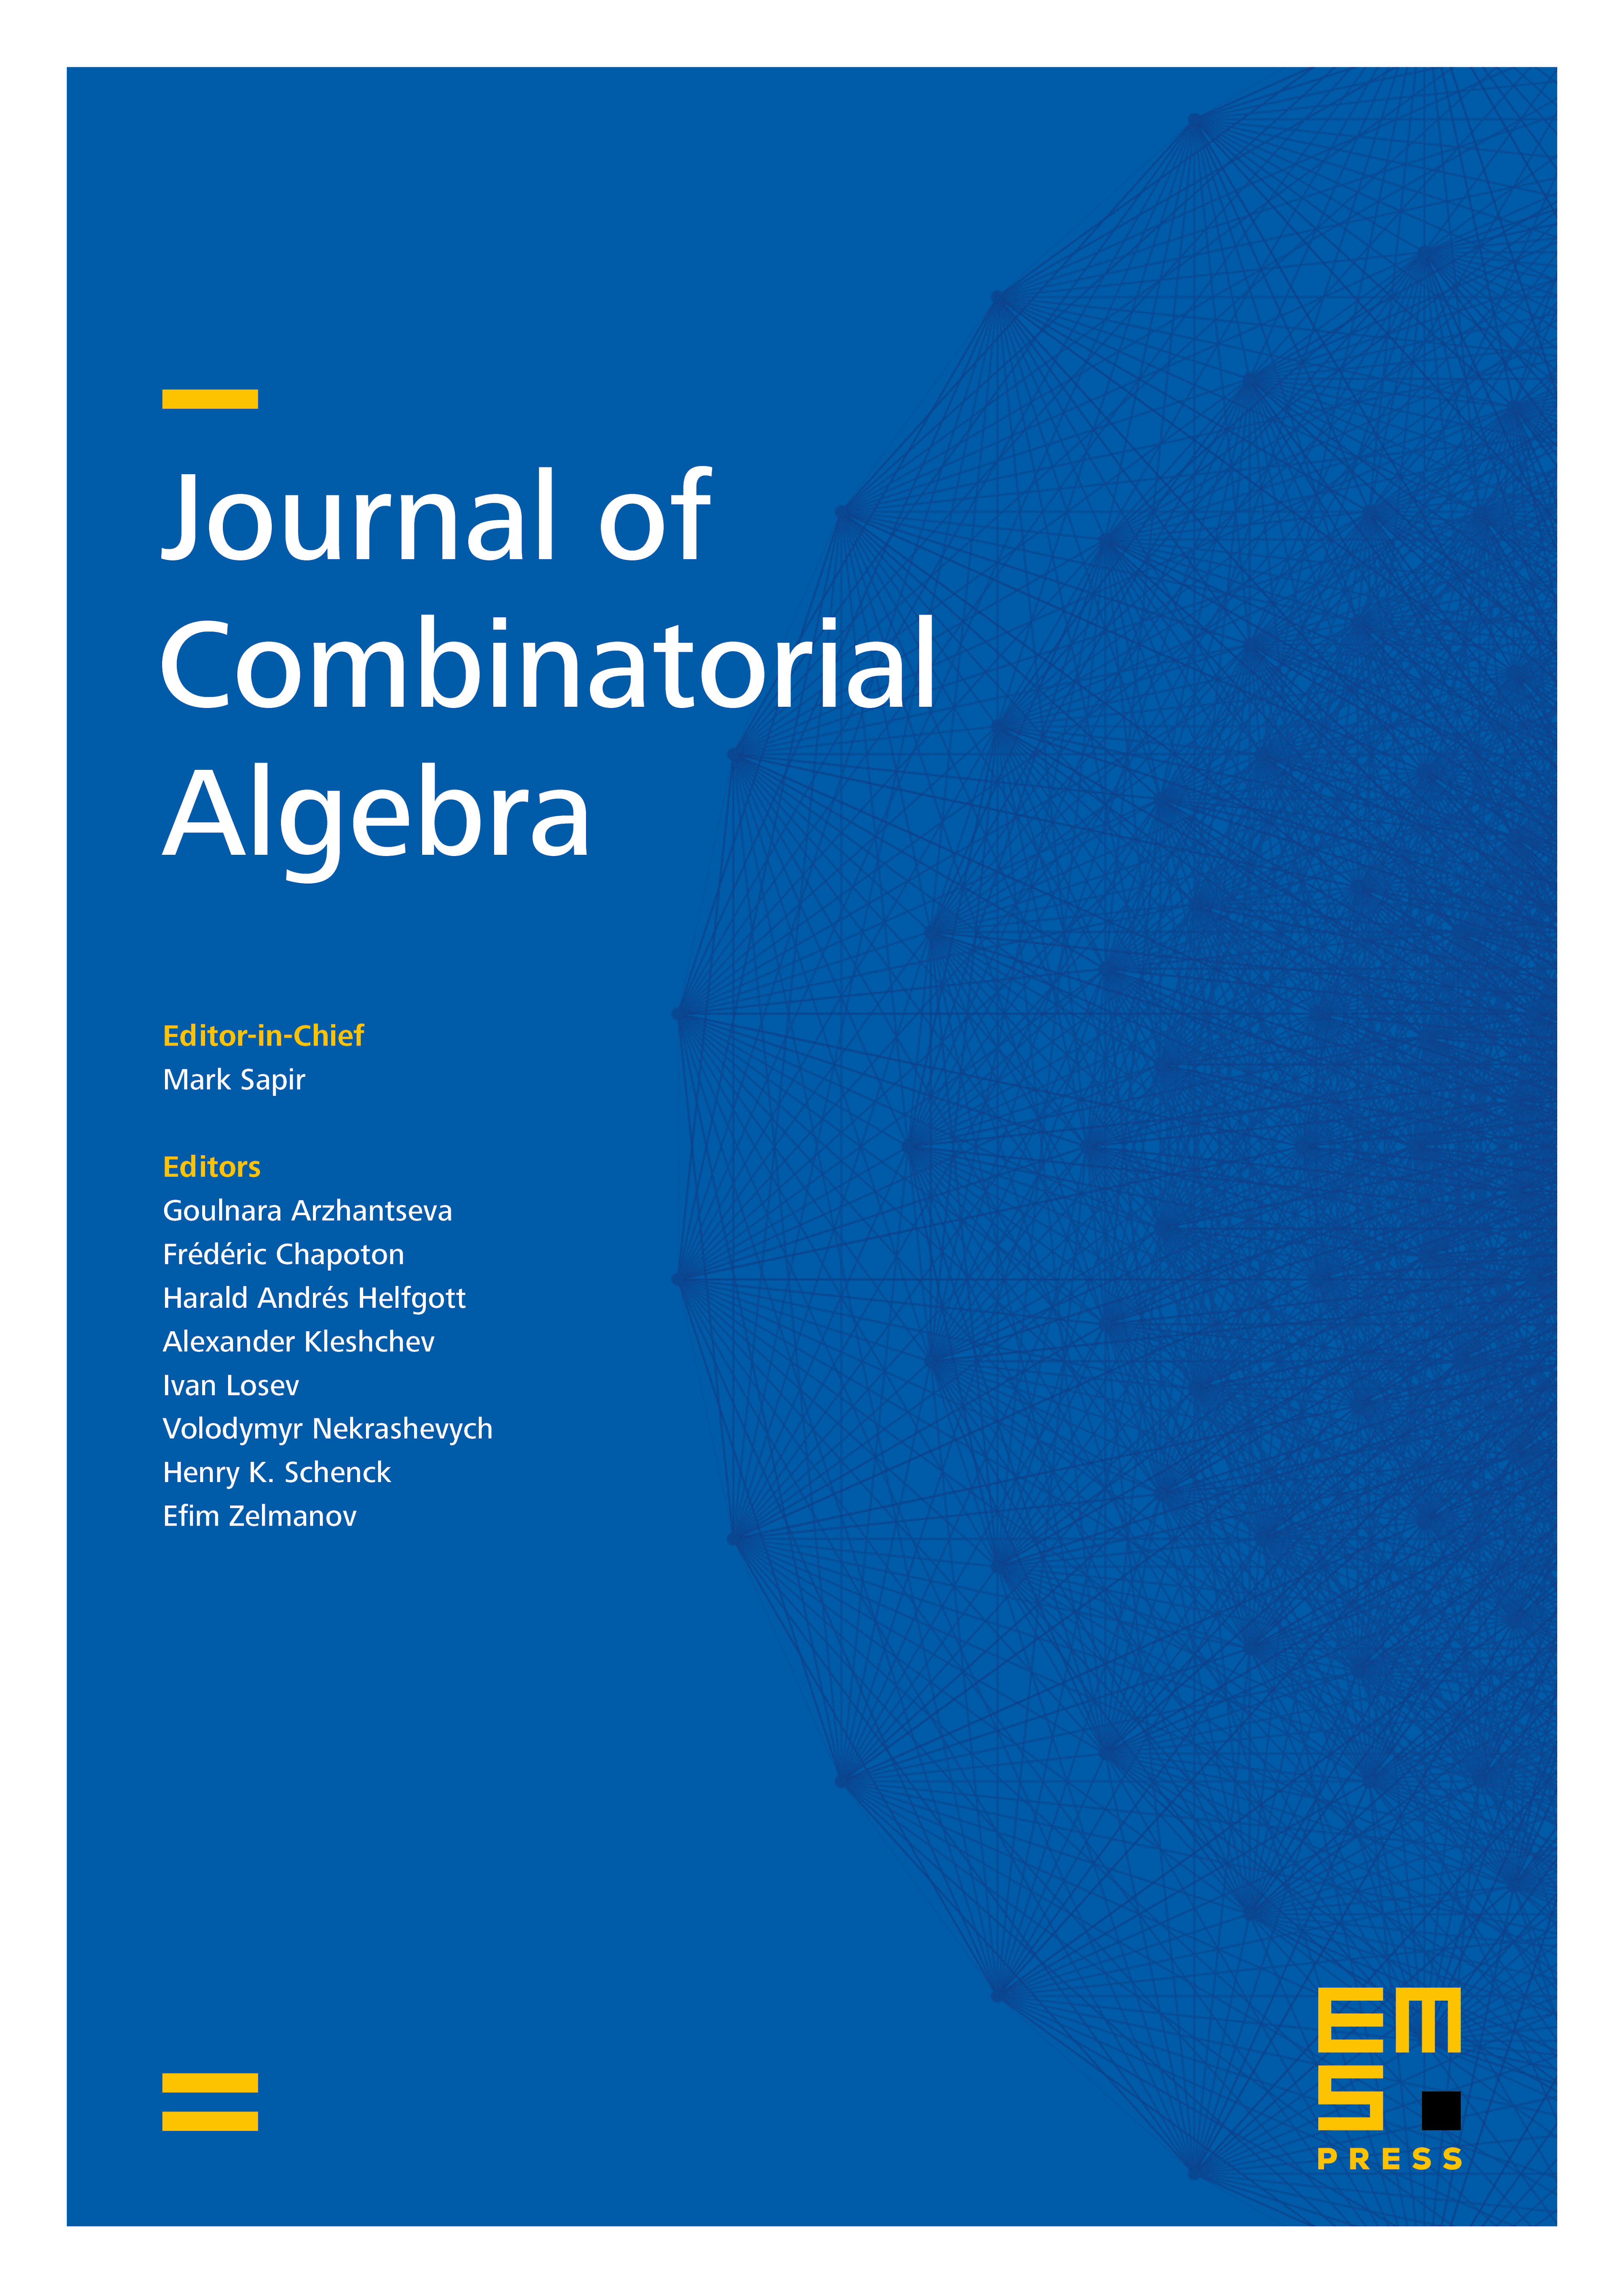 Jucys–Murphy elements and Grothendieck groups for generalized rook monoids cover